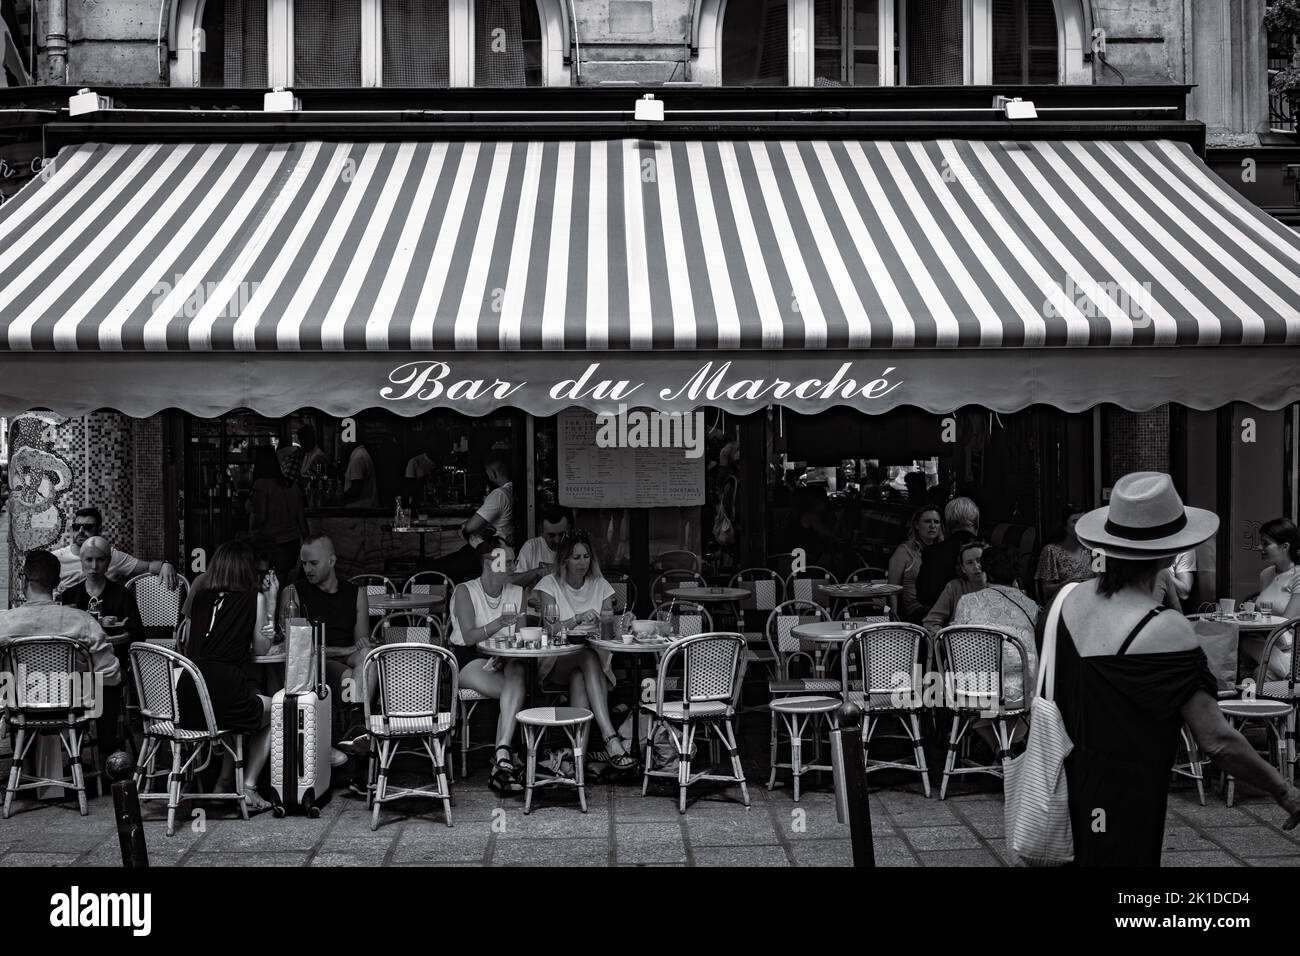 The grayscale view of a cafe on the sidewalkTranslate: The bar Marche Stock Photo